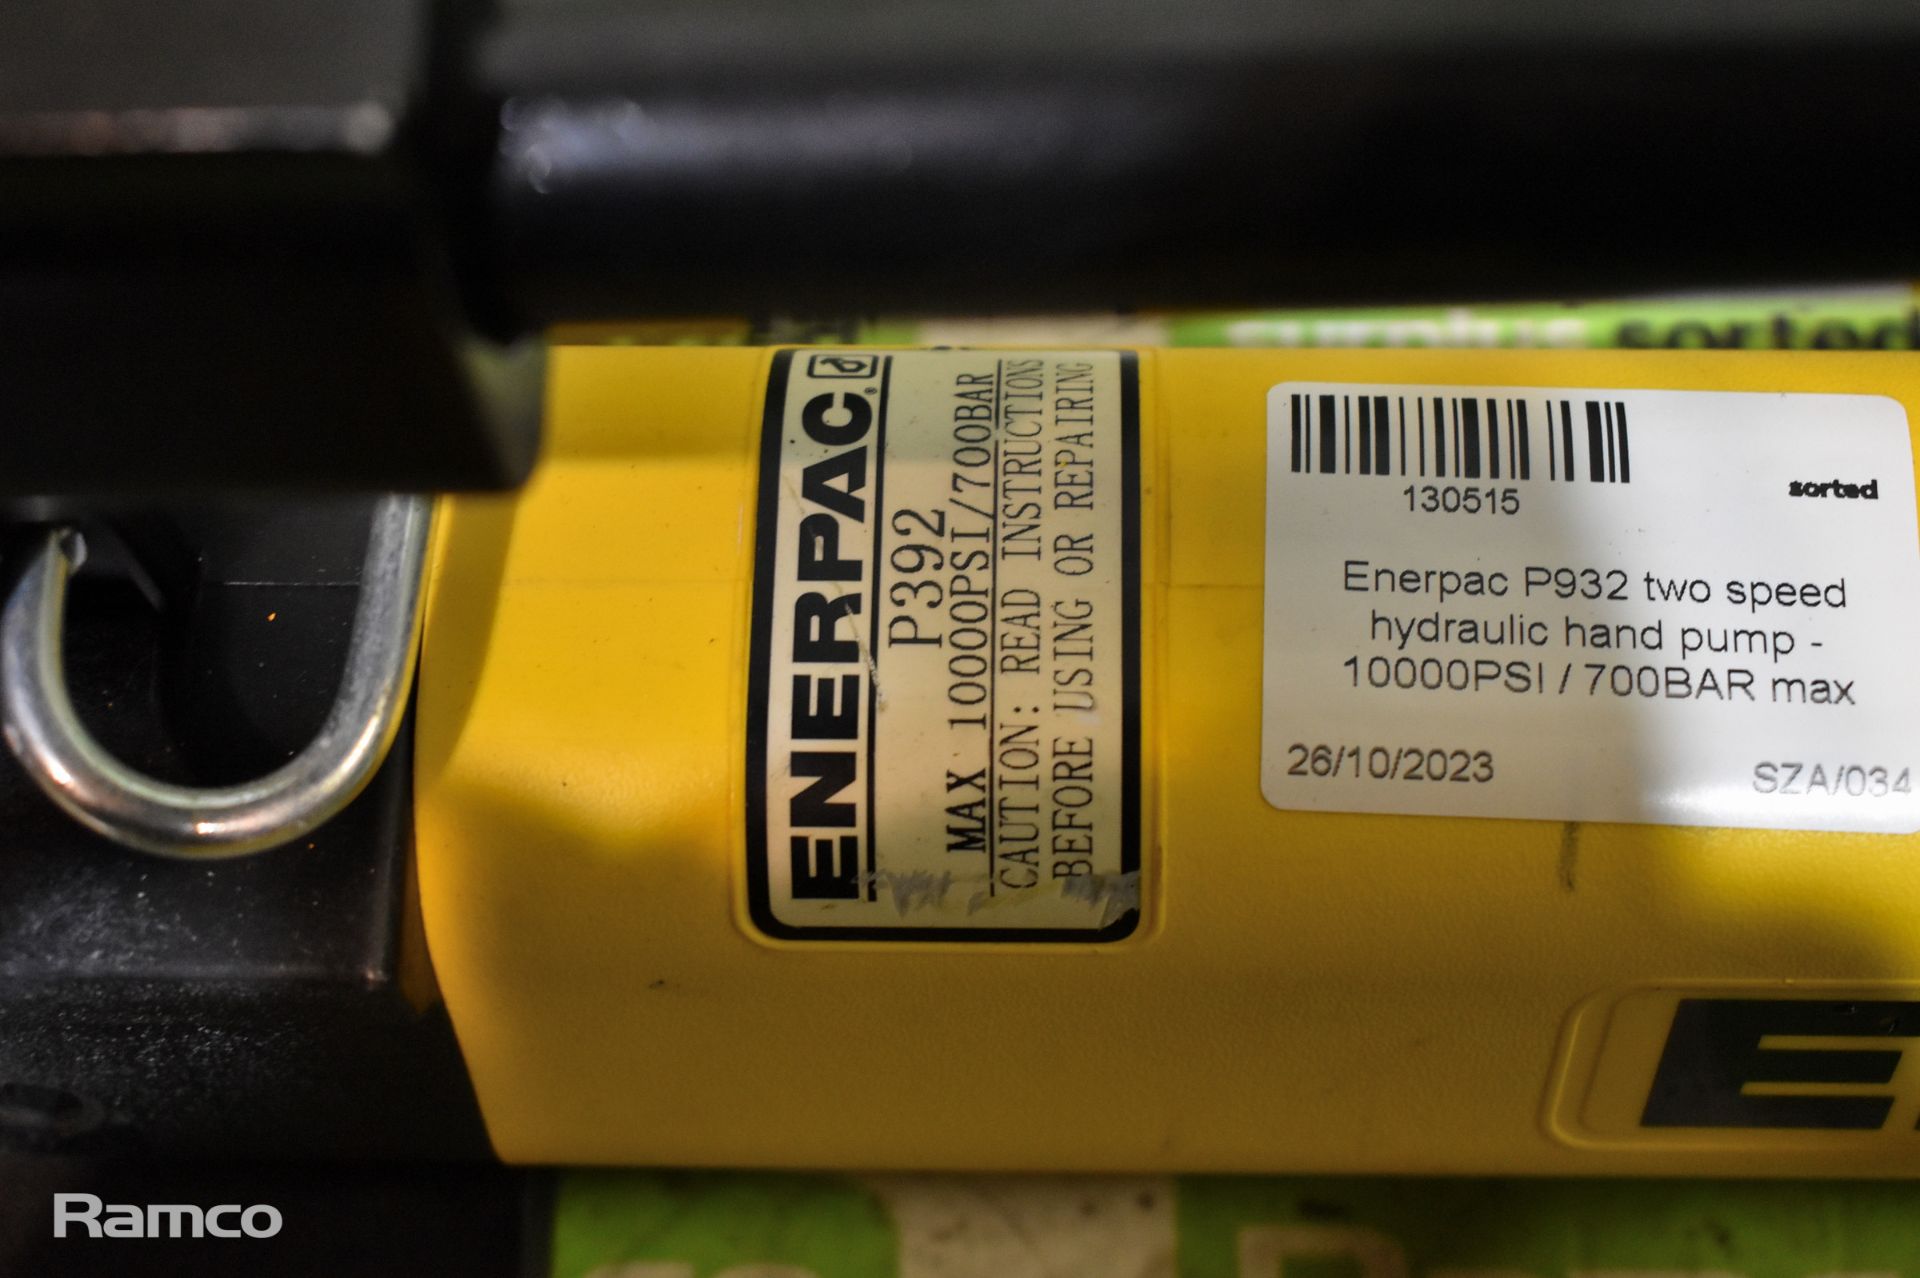 Enerpac P932 two speed hydraulic hand pump - 10000 PSI / 700 BAR max - Image 5 of 6